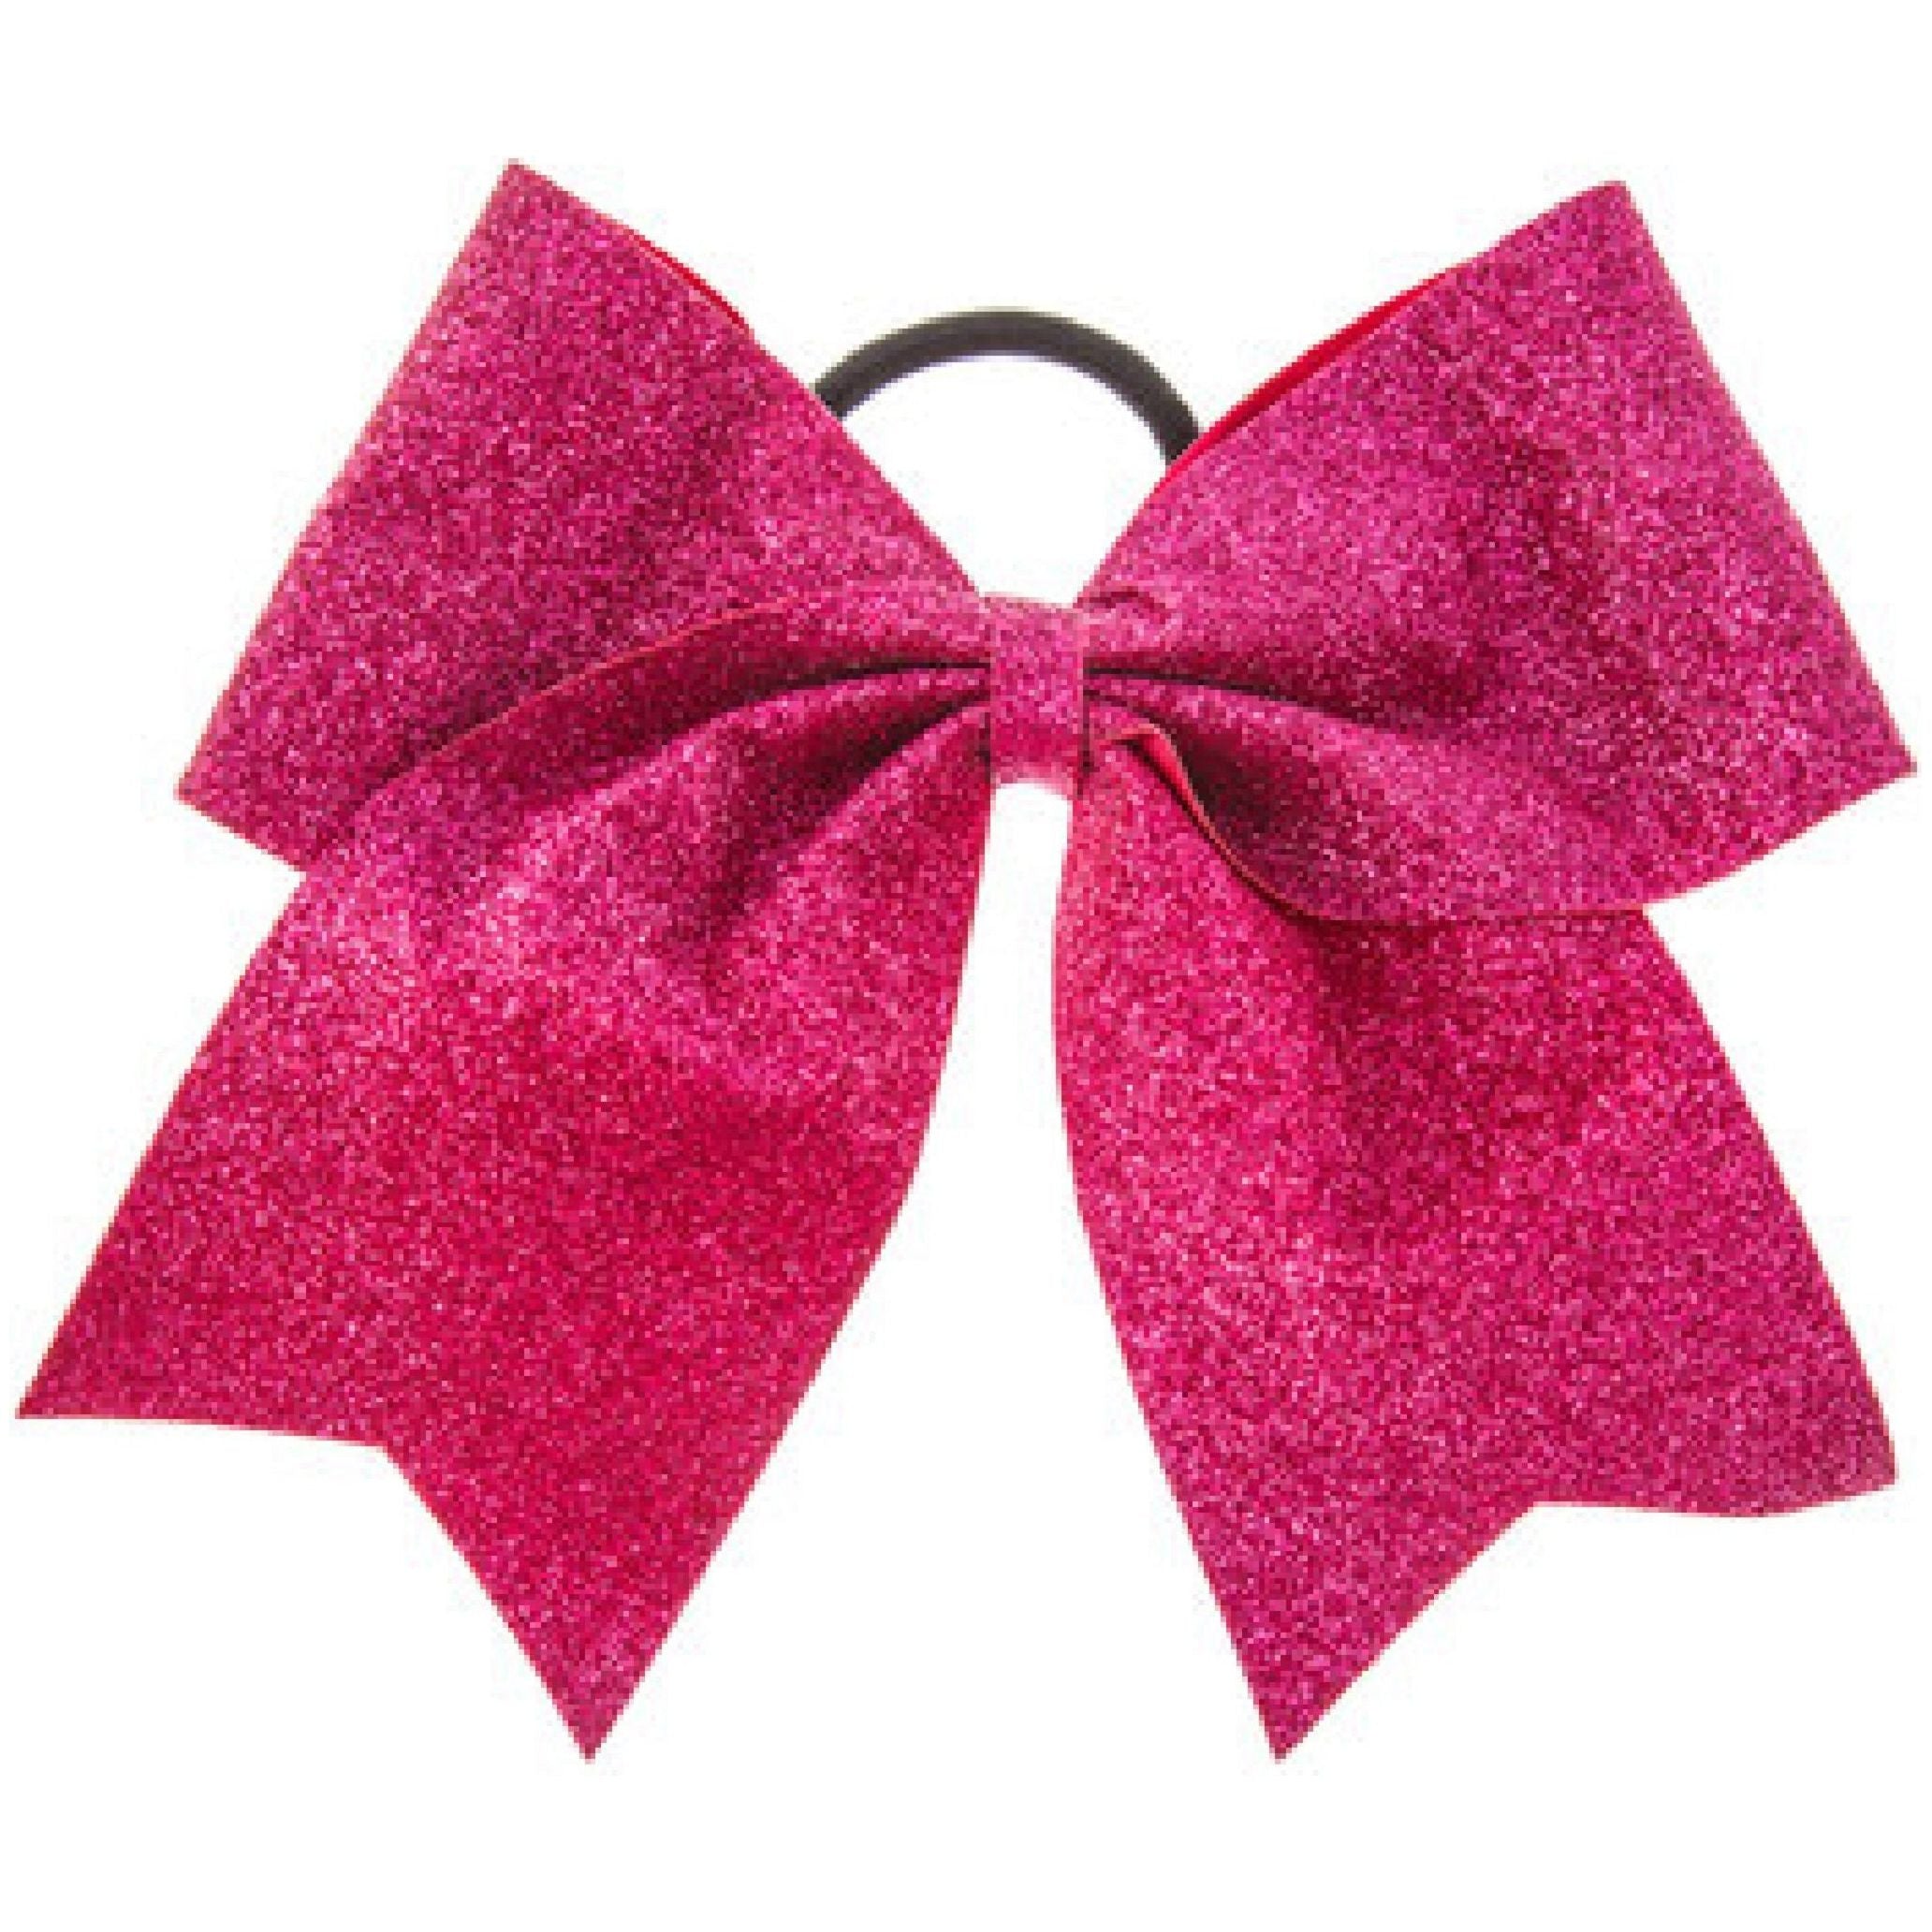 Hot Pink Cheer Bow for Girls Large Hair Bows with Ponytail Holder